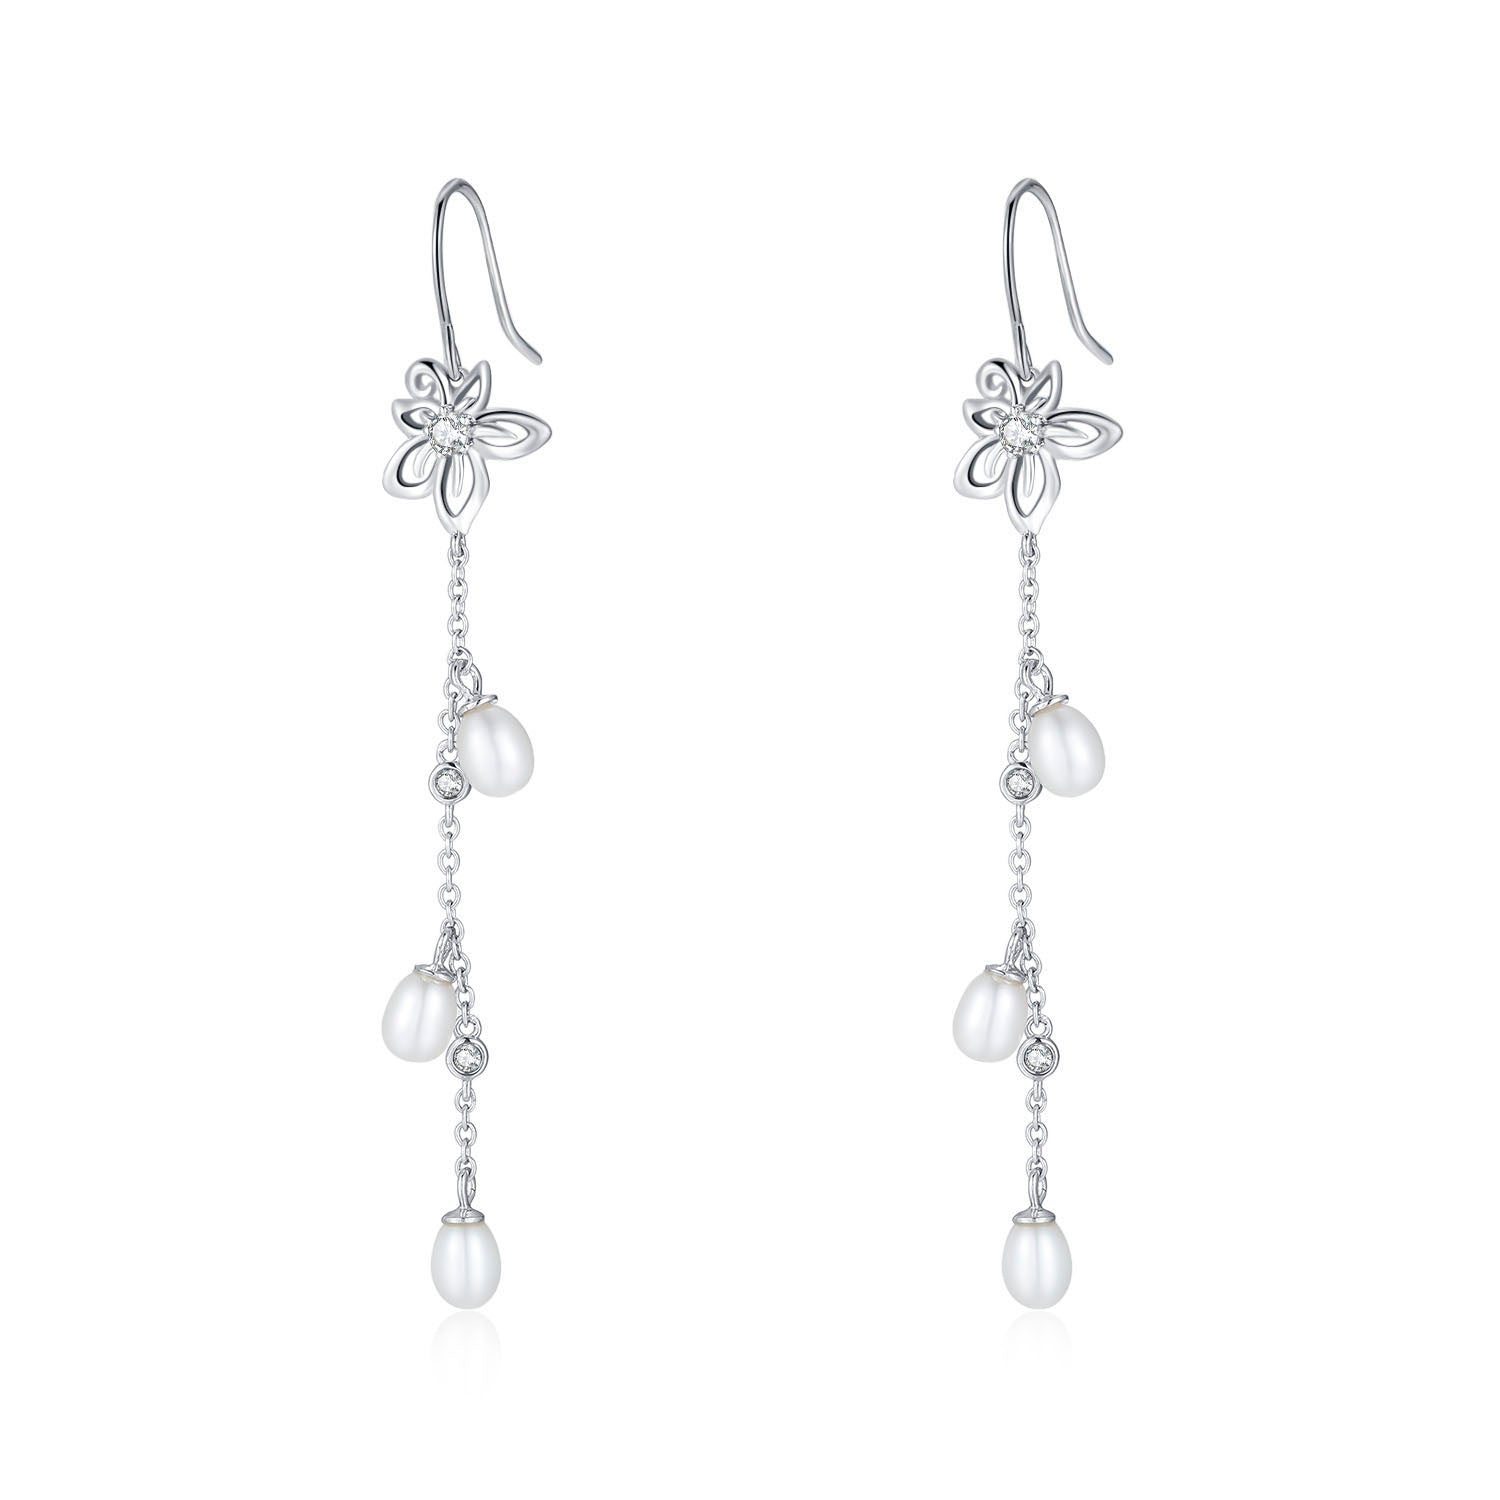 Vicacci 925 Silver Bauhinia Chain Earrings with Swarovski Clear Crystals